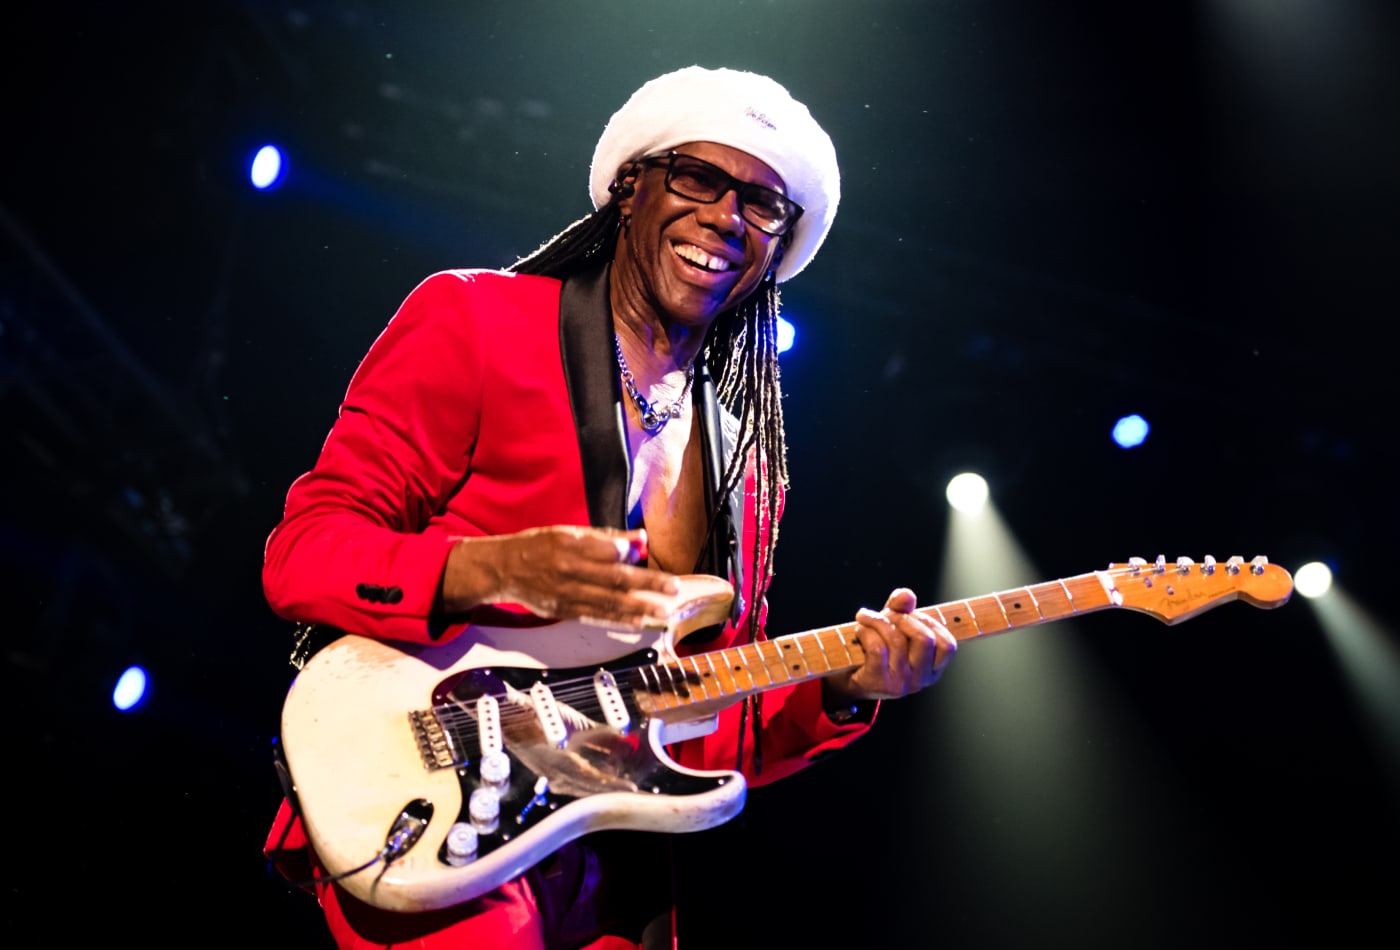 Nile Rodgers net worth playing guitar on stage